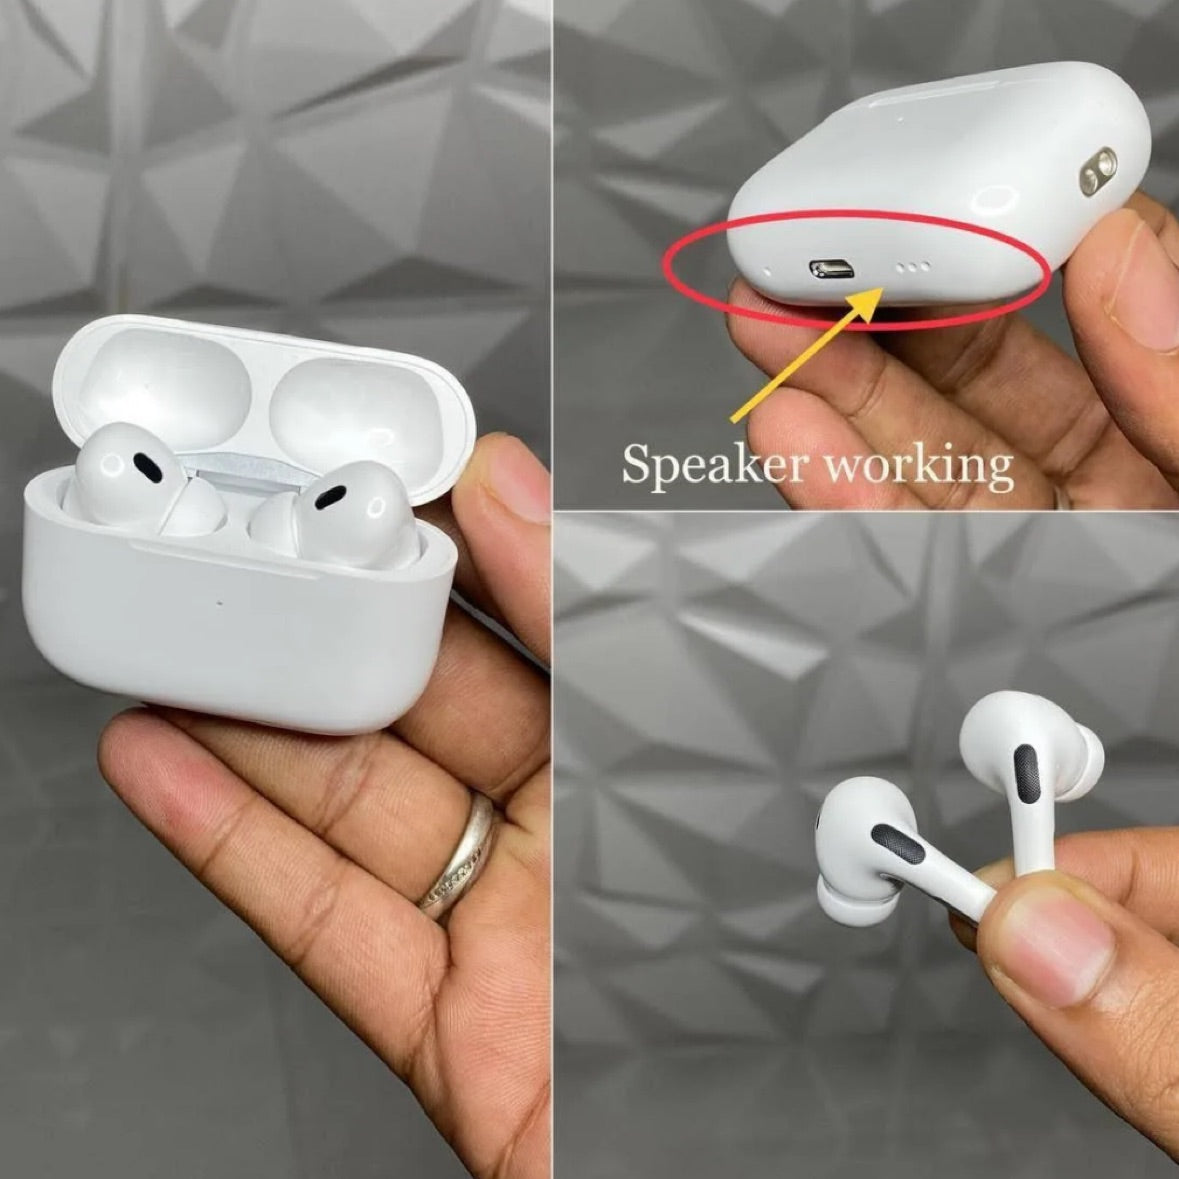 Air pods pro 2 Clone with all iOS features working - Compatible